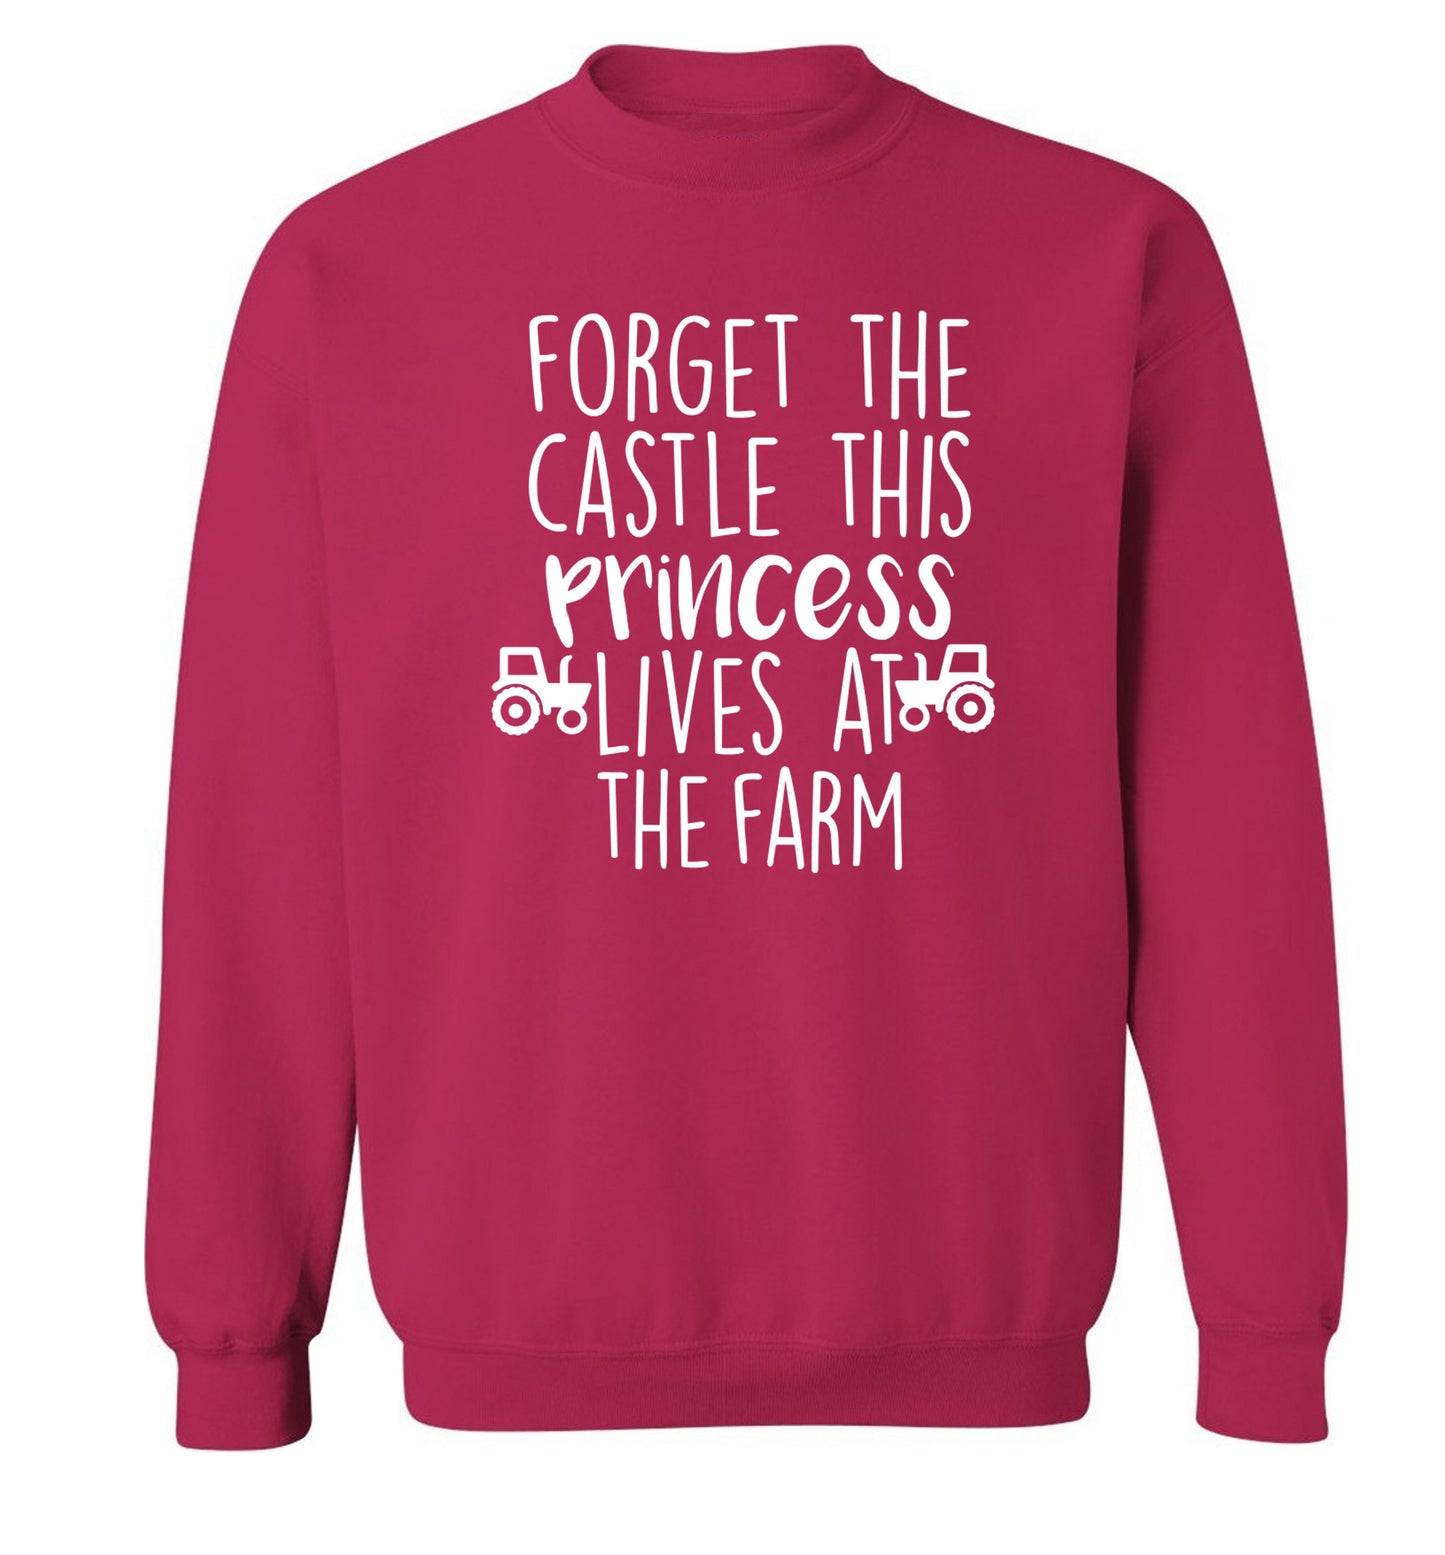 Forget the castle this princess lives at the farm Adult's unisex pink Sweater 2XL